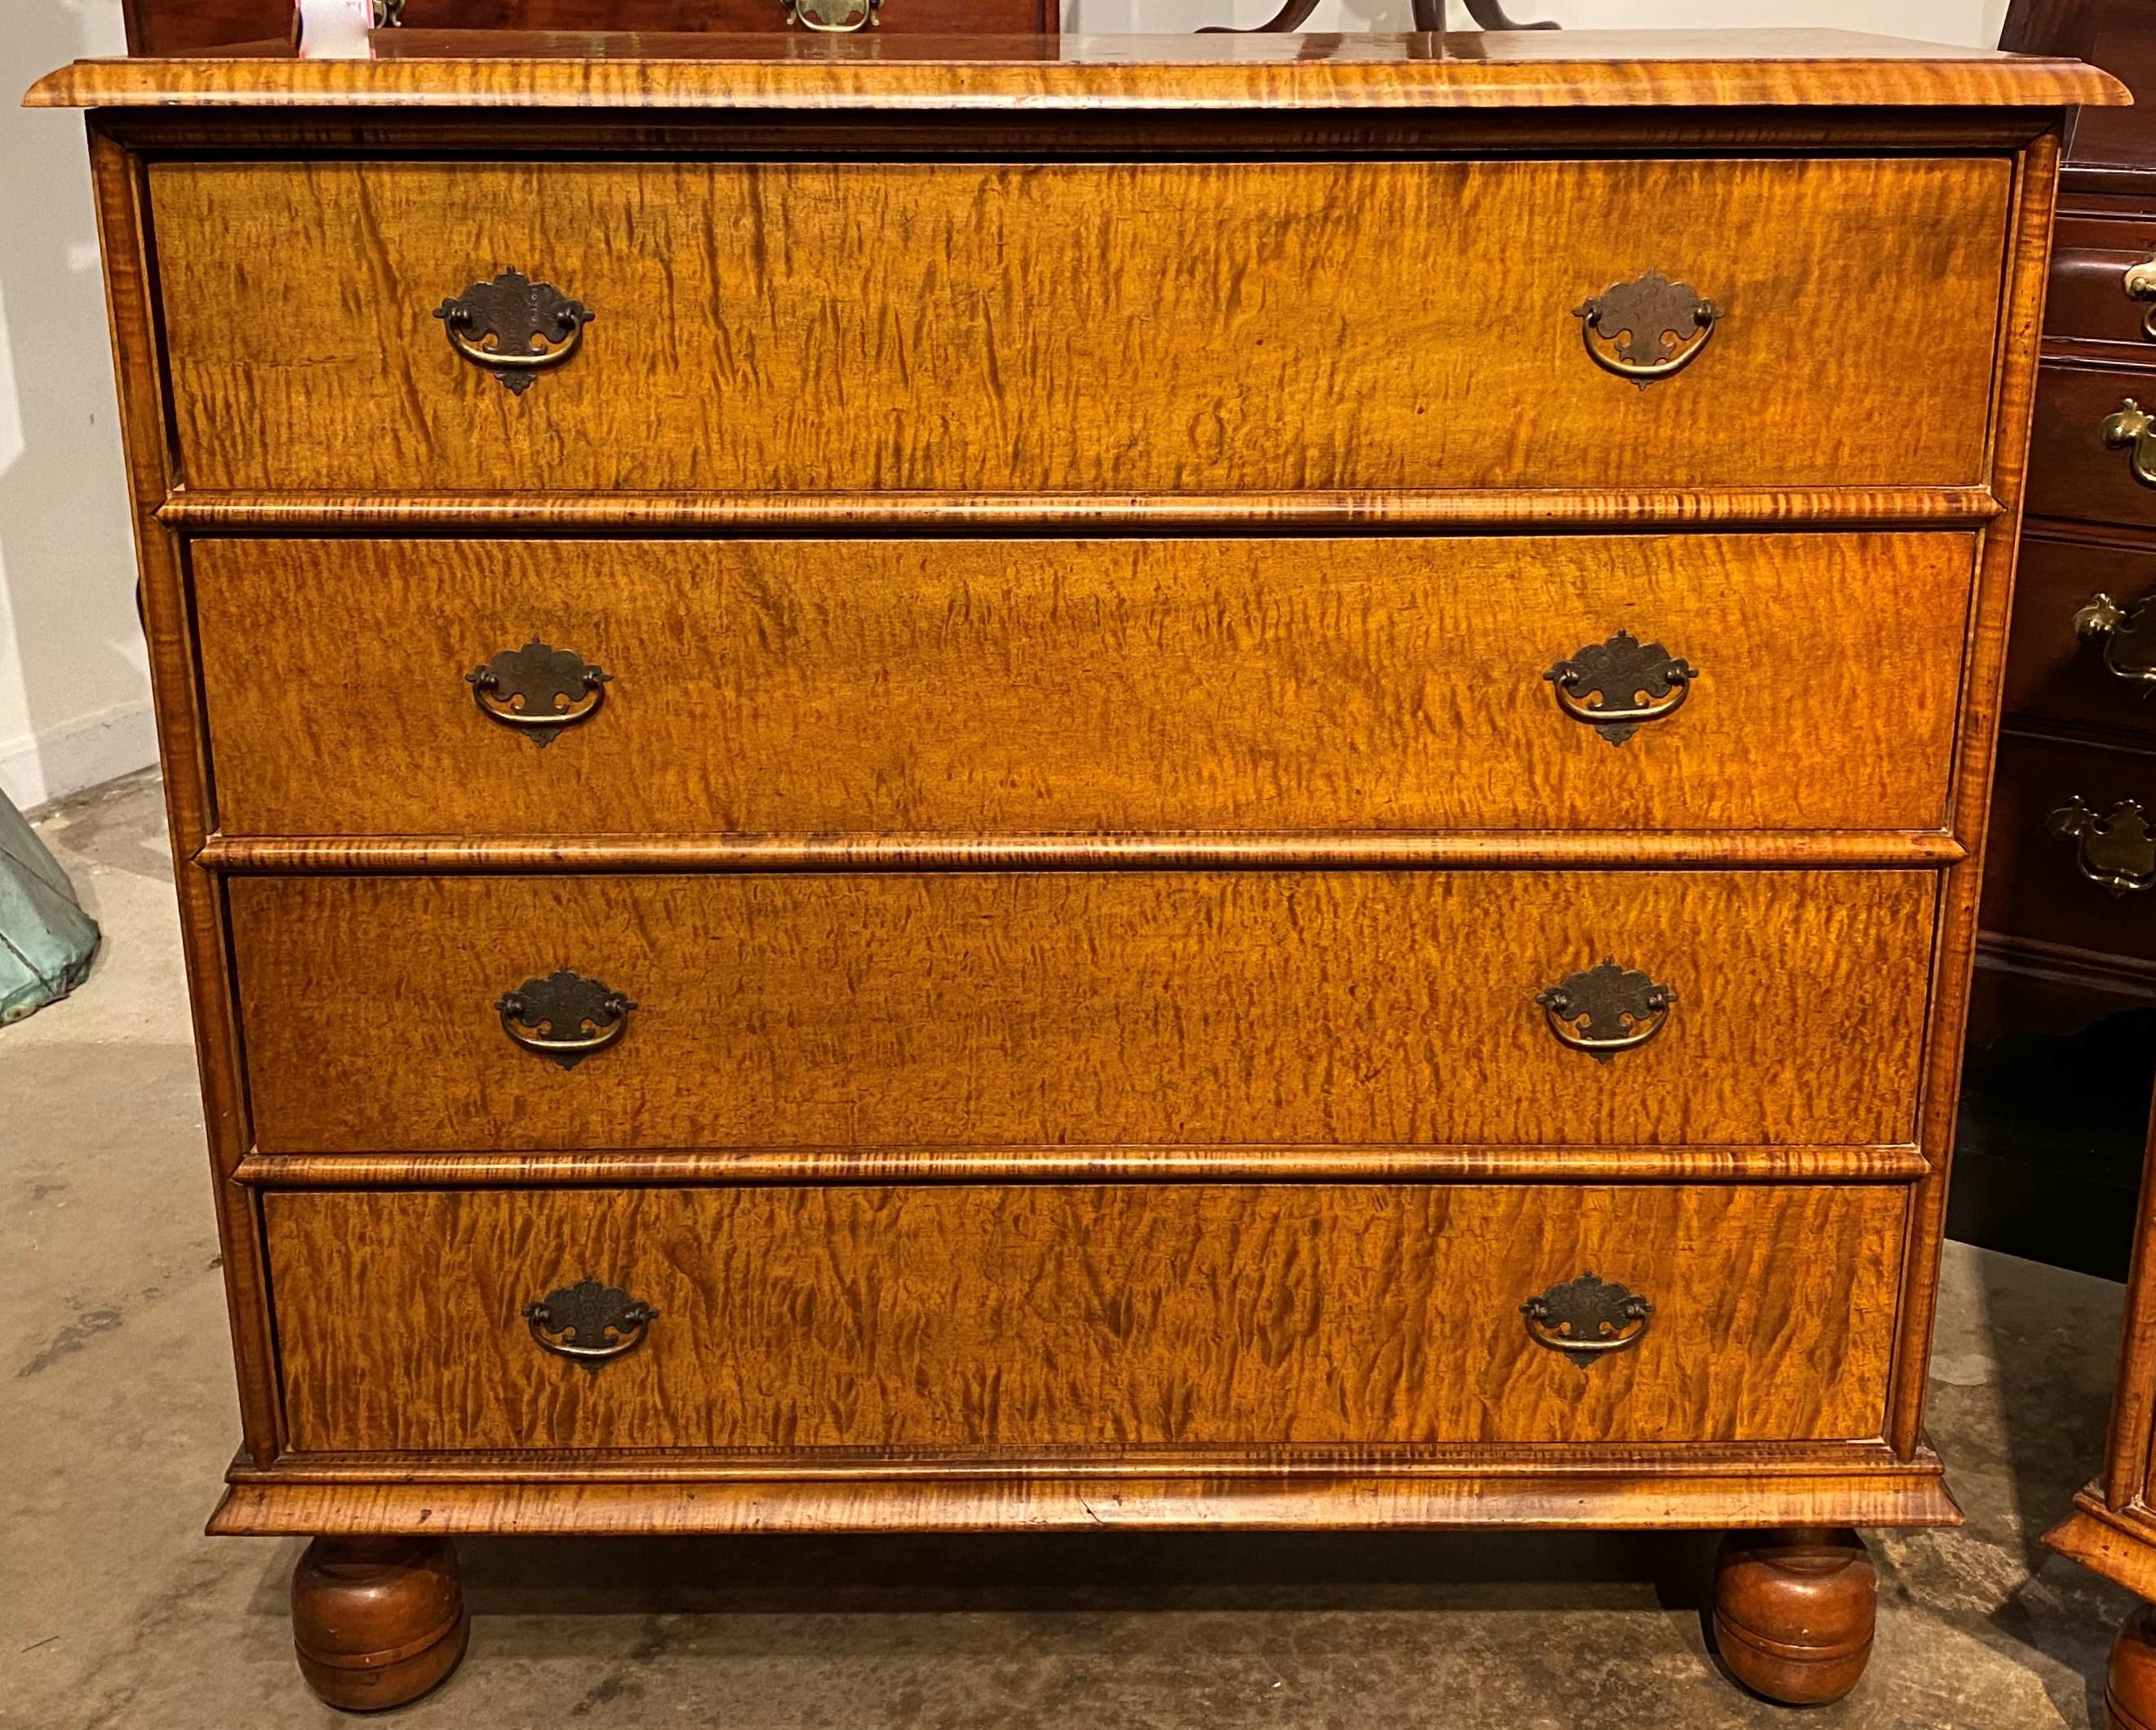 An exceptional pair of tiger maple rectangular chests or dressers in the William & Mary style, with molded edge tops, surmounting a case with four drawers, each with decorative incised brass pulls, each top drawer branded “Wallace Nutting”, and